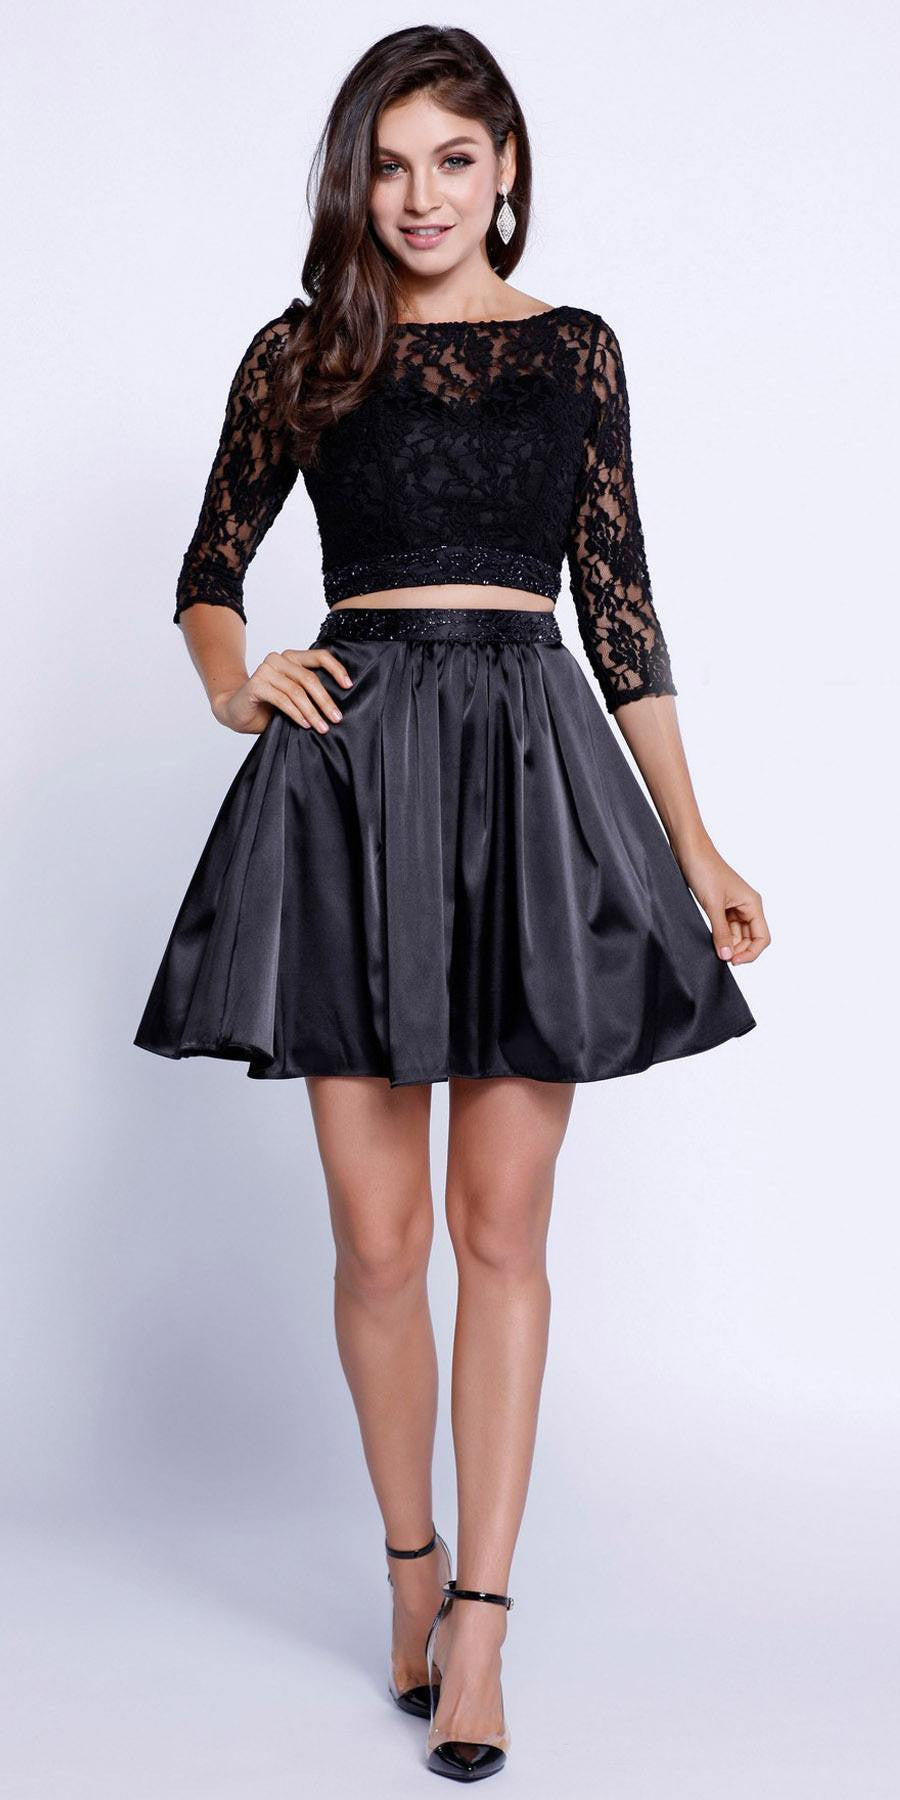 Quarter Sleeves Lace Top Short Two-Piece Prom Dress Black ...